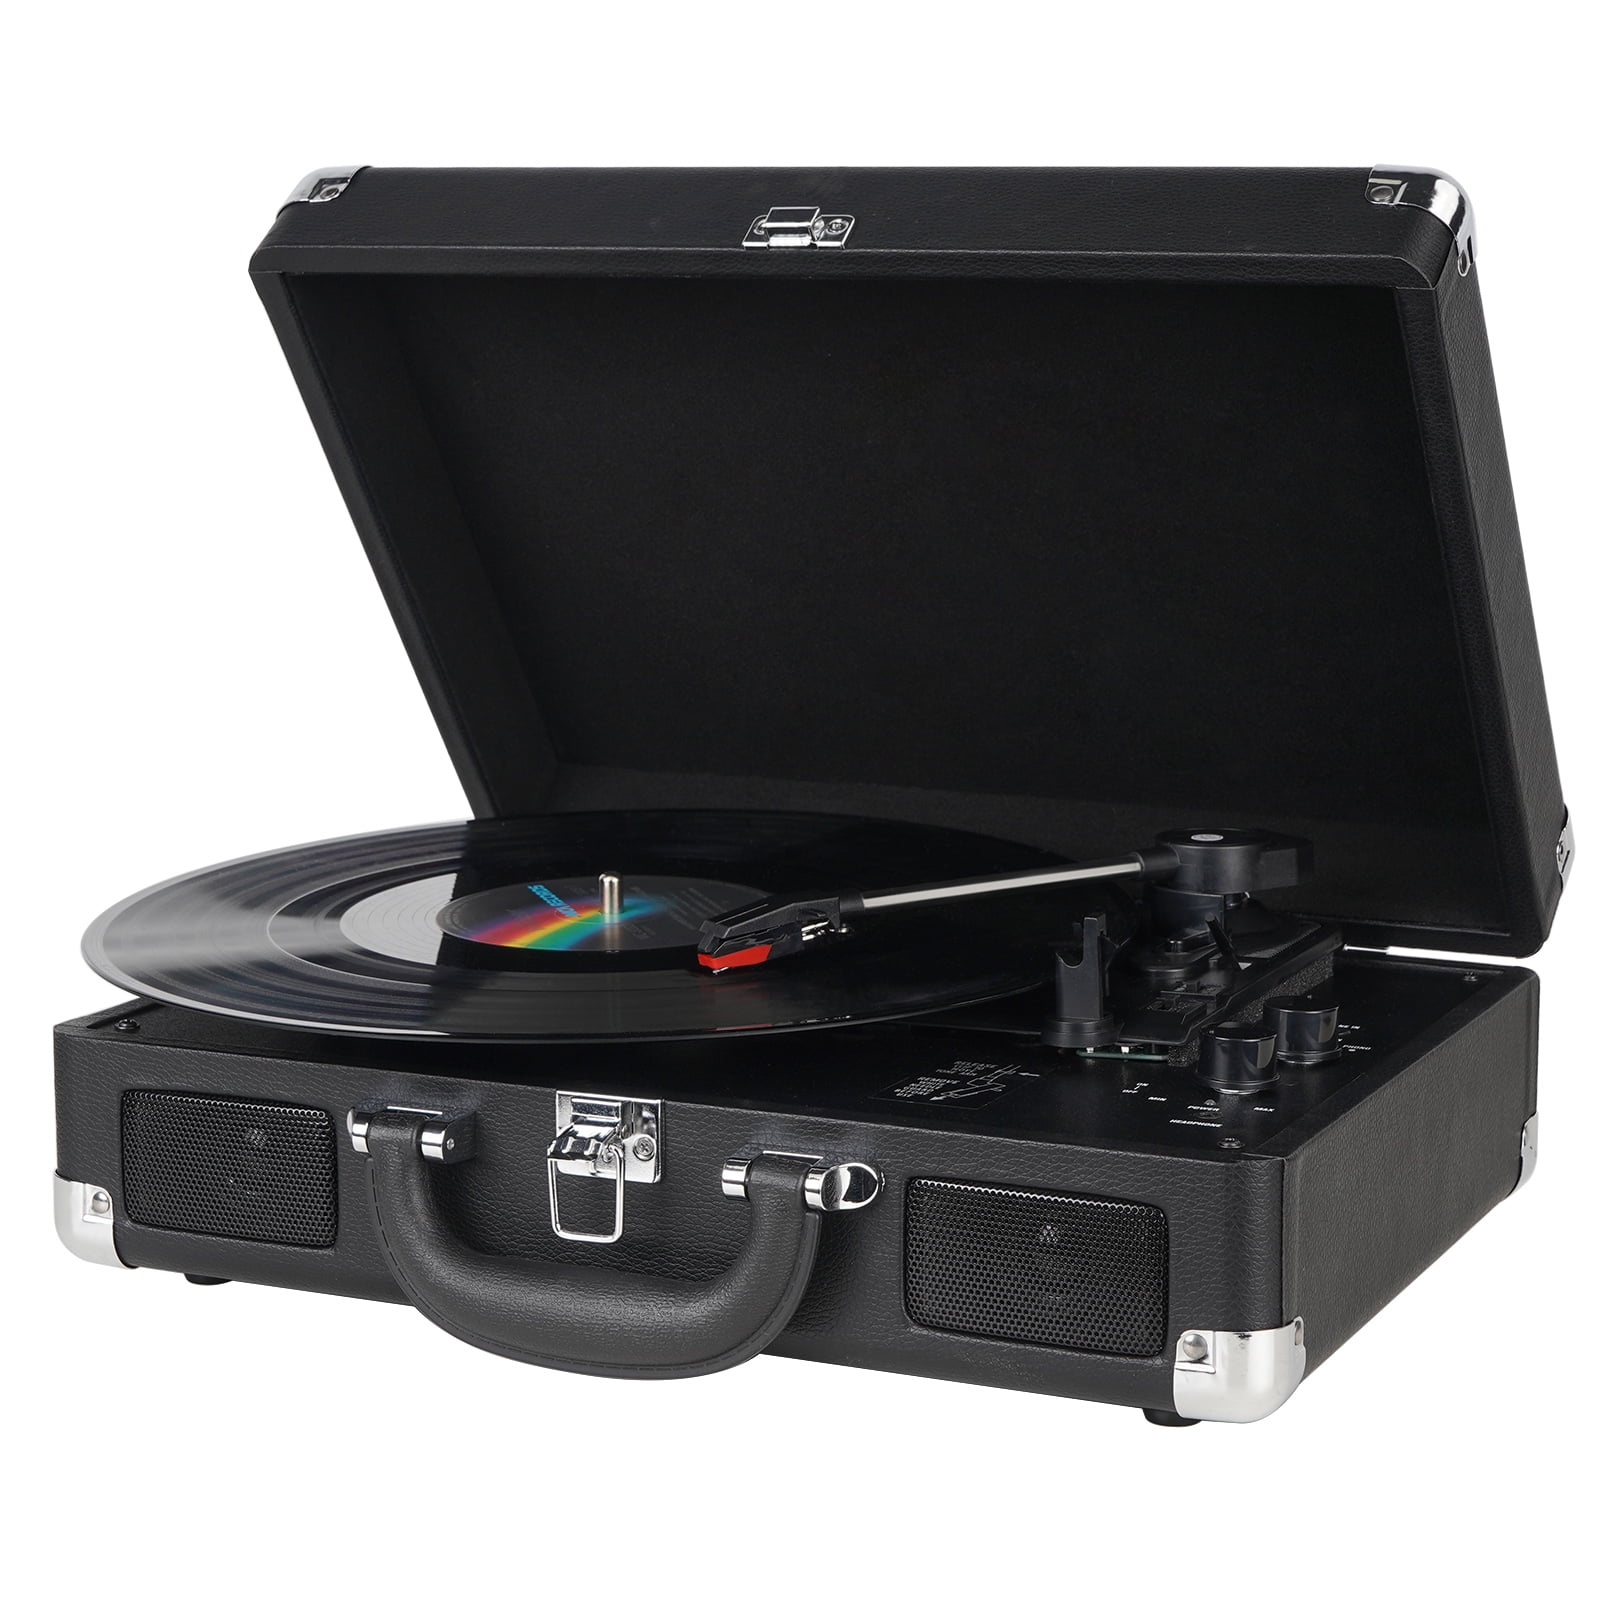 Record　Built-in　Player　Speeds　Suitcase　Design　Speakers,　DIGITNOW　with　Stereo　Bluetooth　Turntable　Black